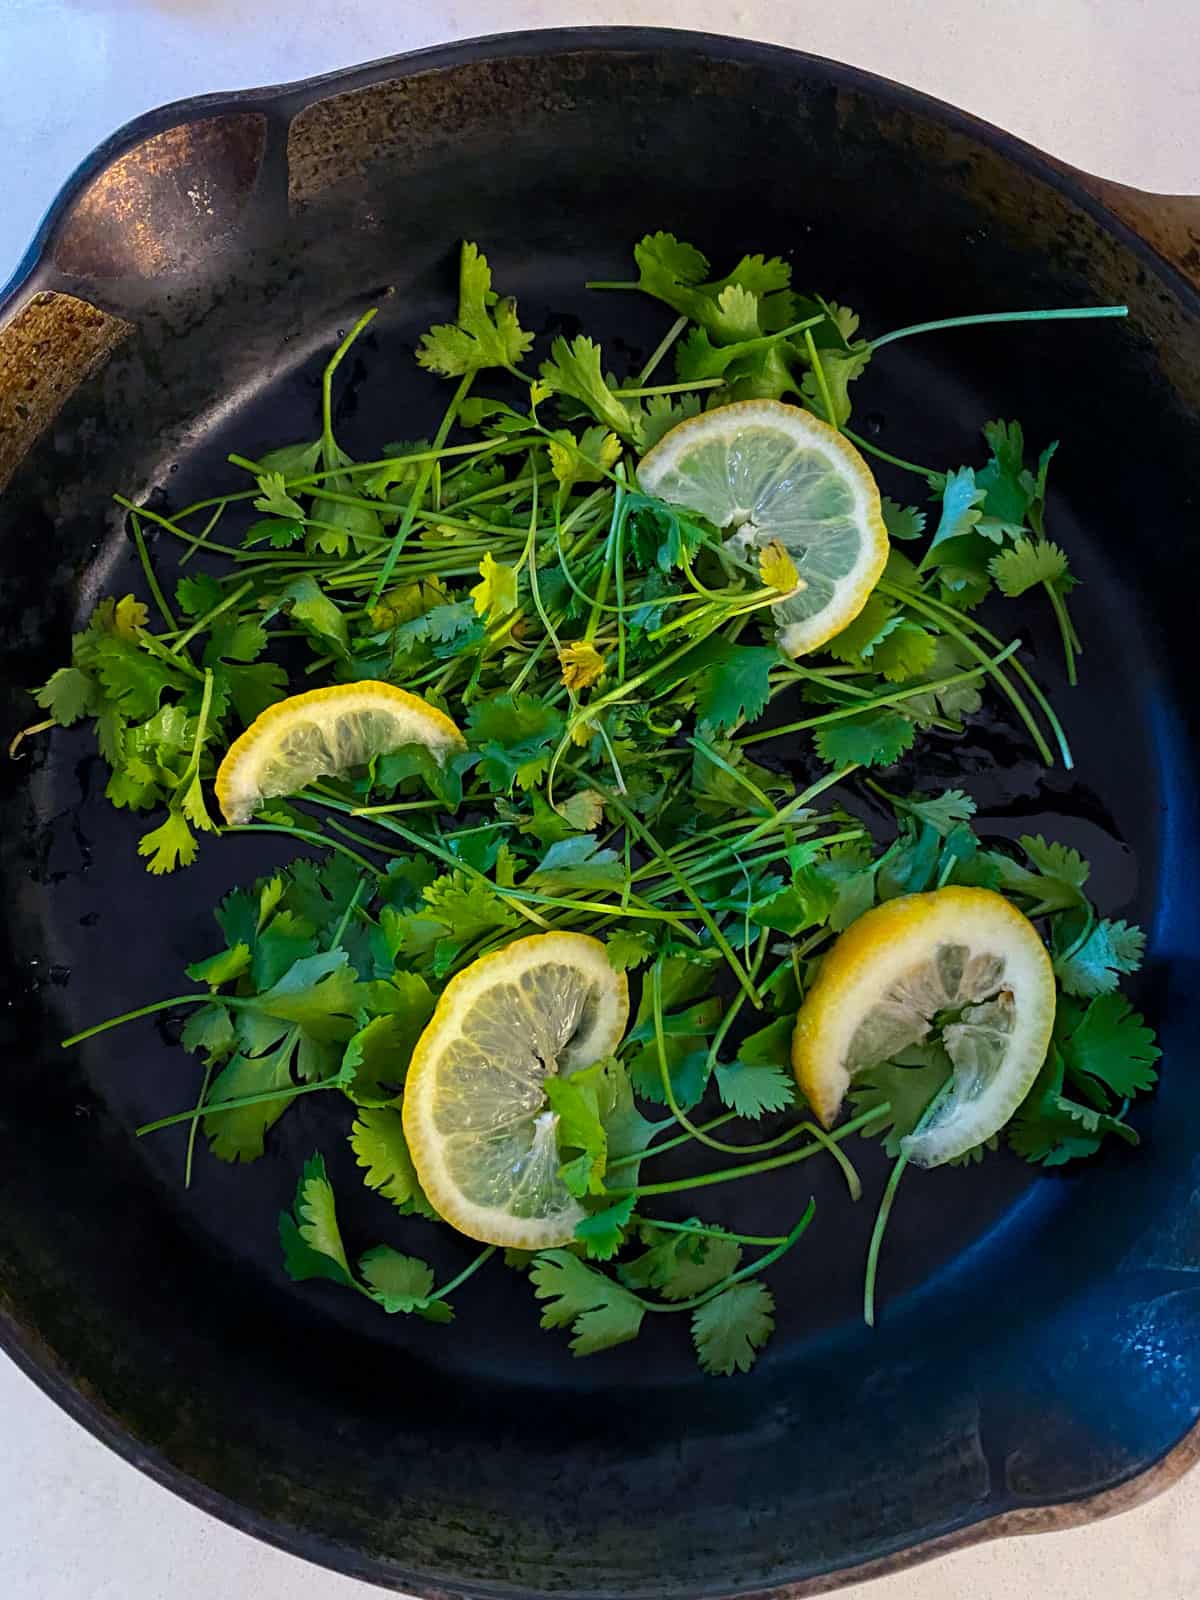 Lay fresh herbs and a few lemon slices on the bottom of the baking dish or cast iron.